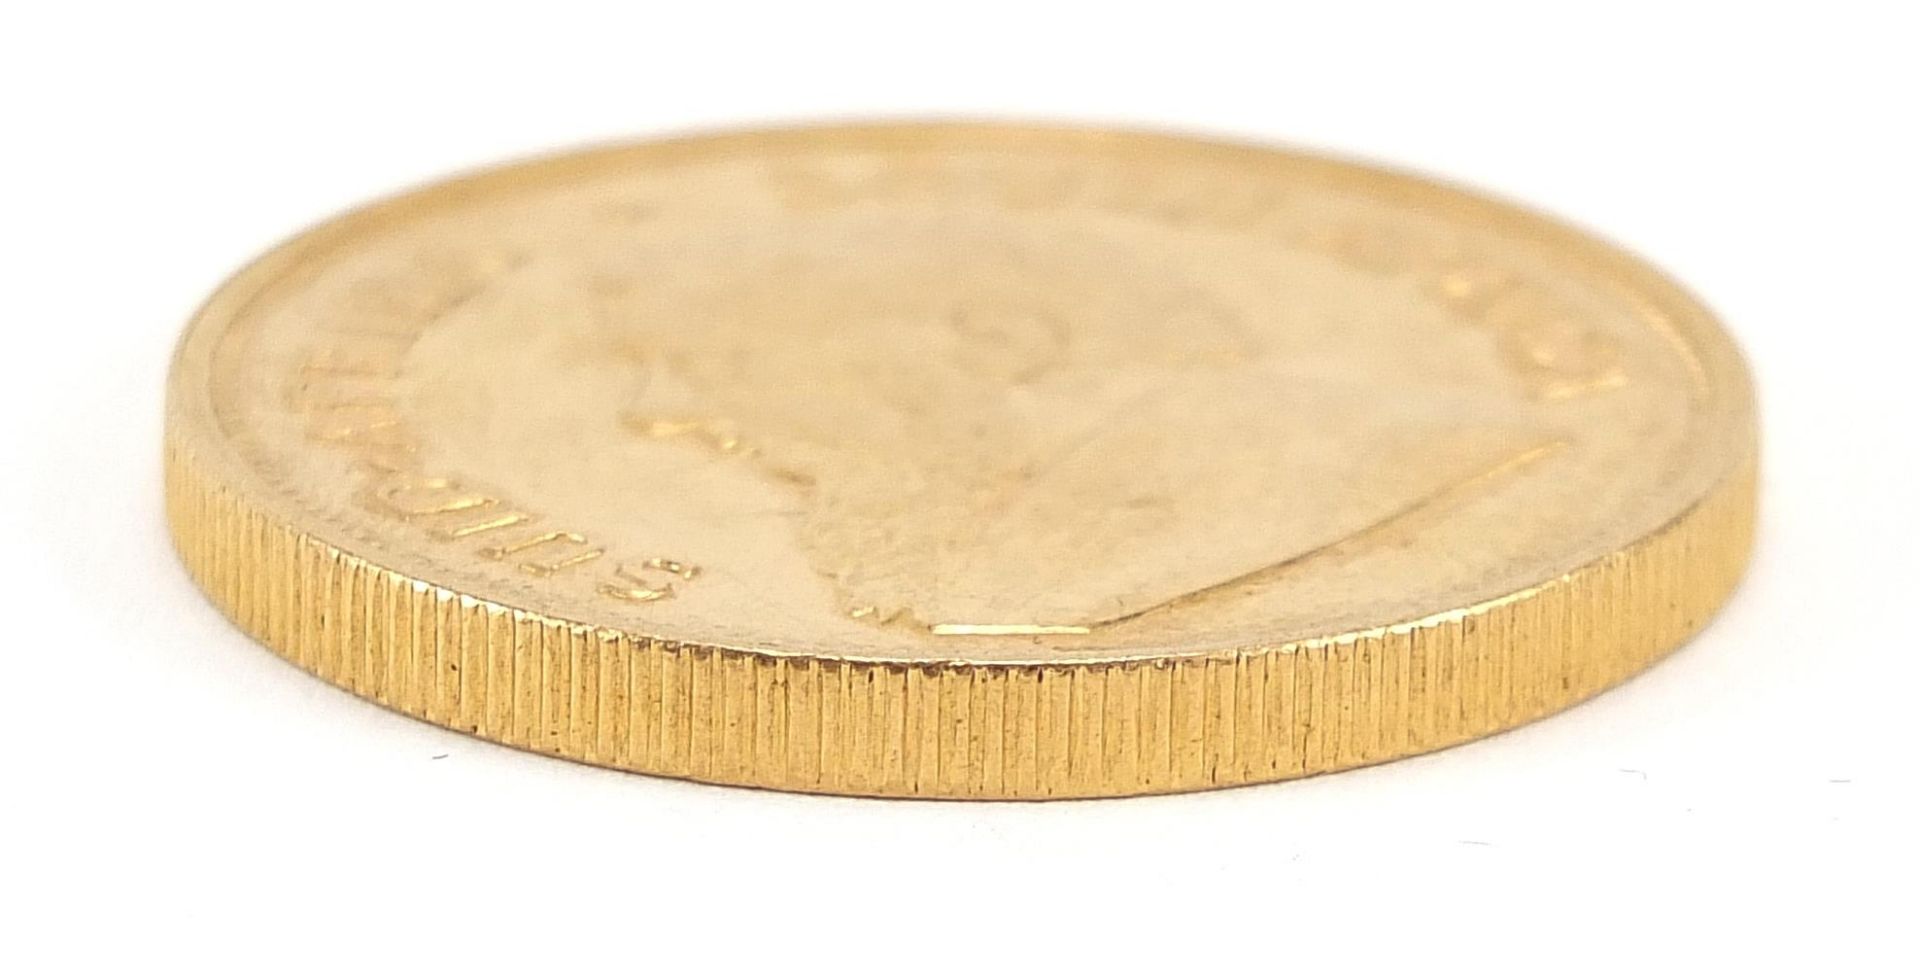 South African 1975 gold krugerrand - this lot is sold without buyer's premium - Image 3 of 3